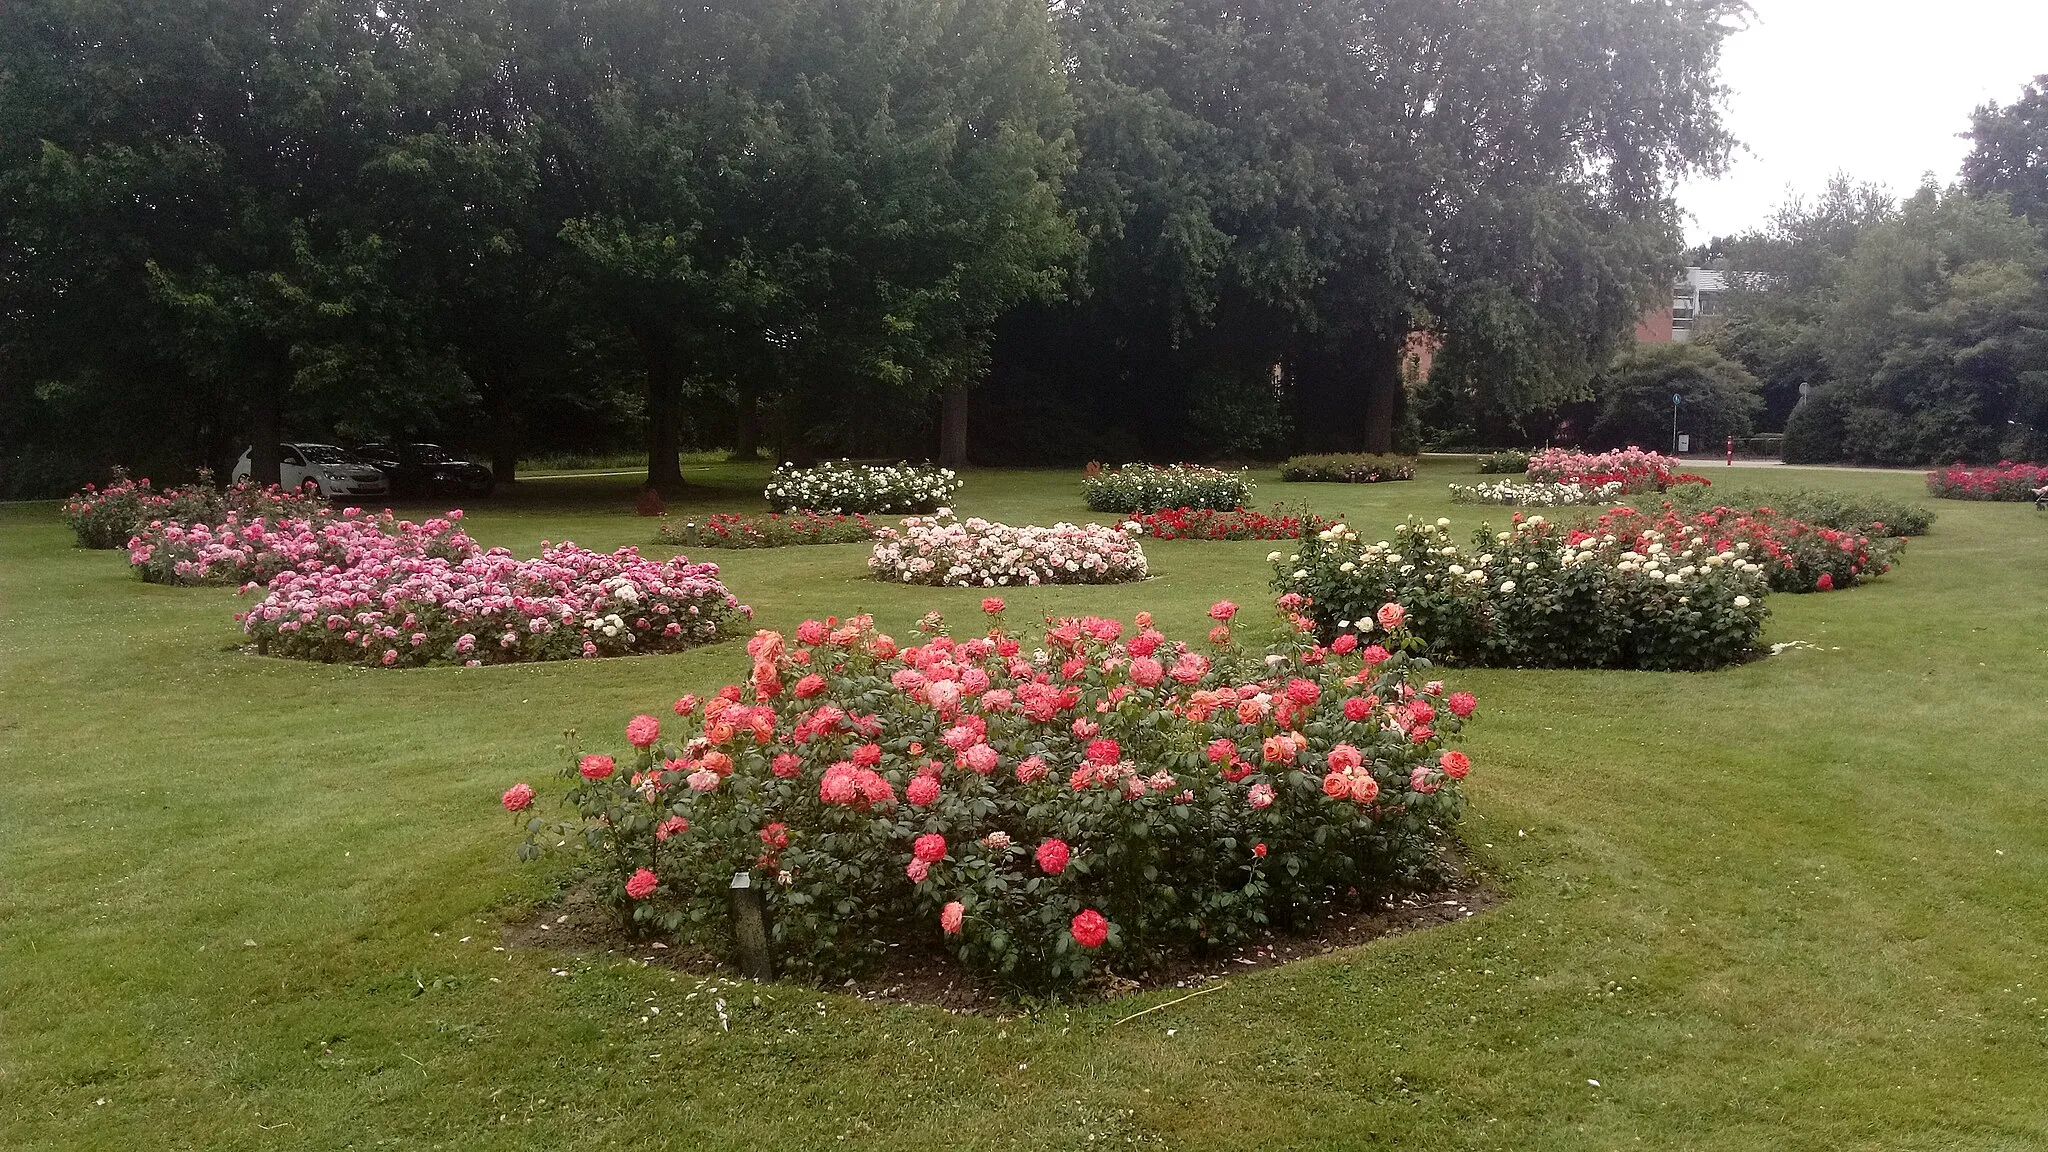 Photo showing: The second day of the local rose festival (Dutch: Rozenfestival) held annually in the Rosarium rose park in the Groninger city of Winschoten, Oldambt.